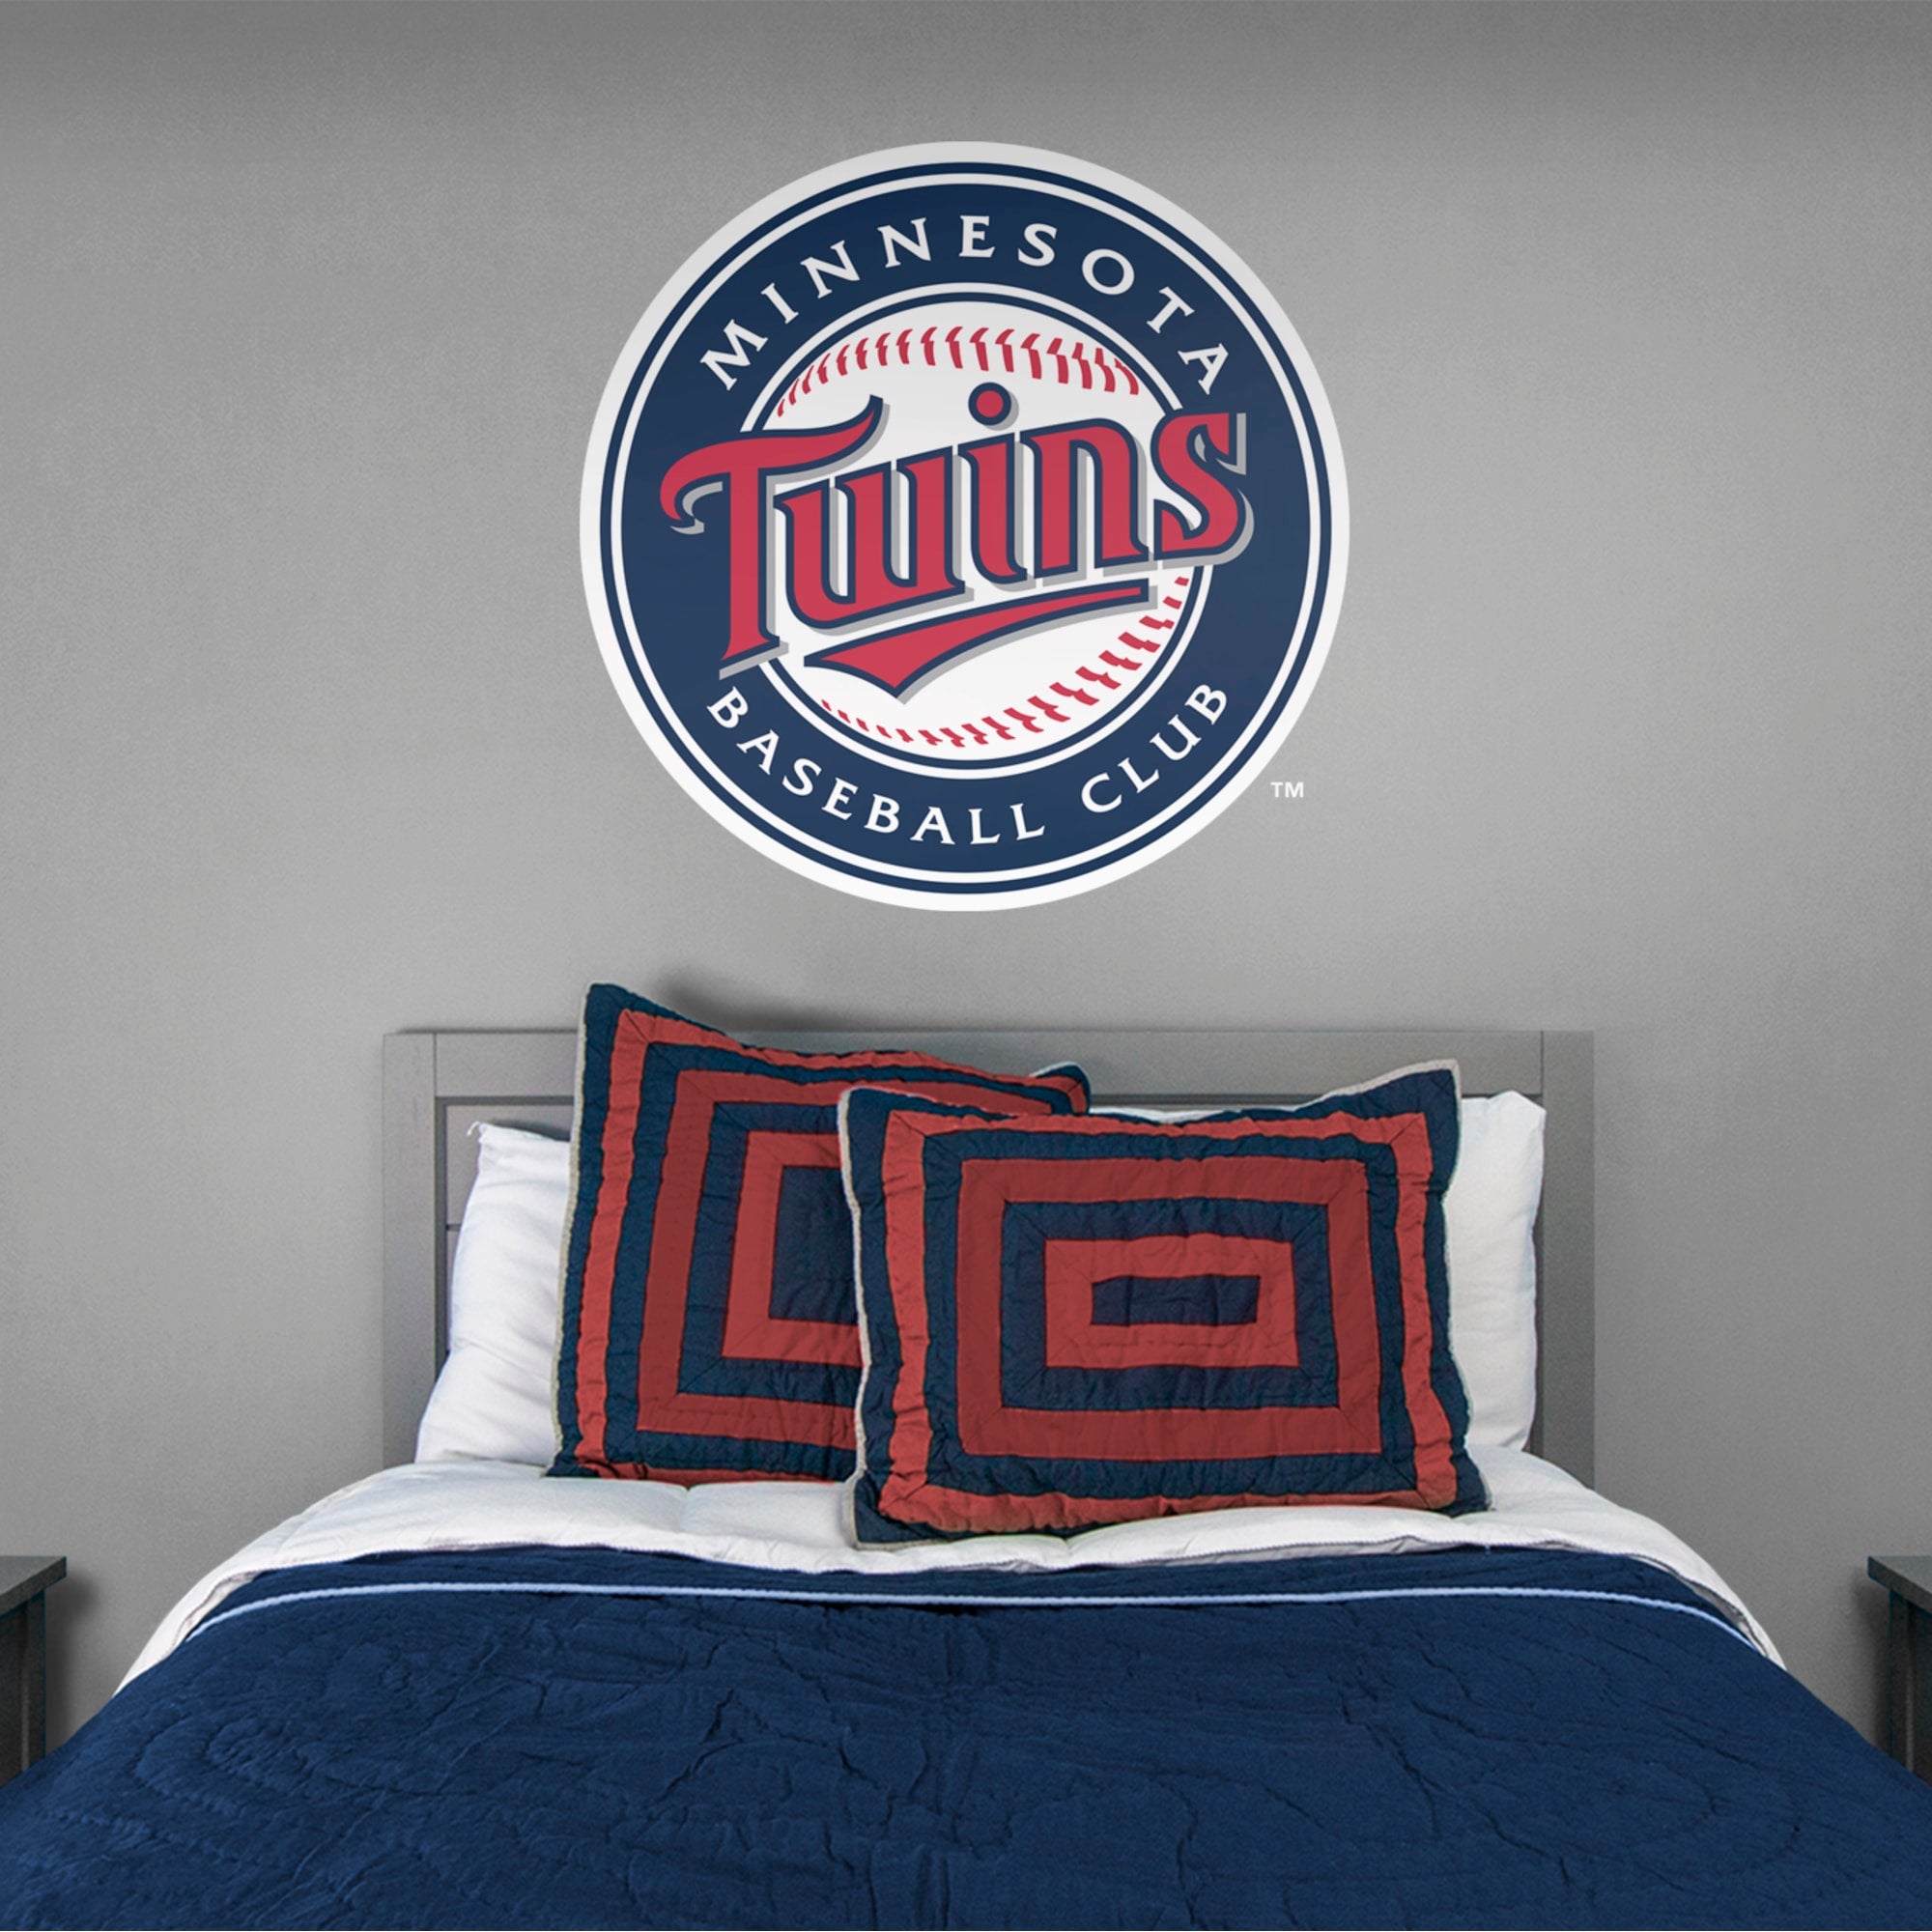 Minnesota Twins: Logo - Officially Licensed MLB Removable Wall Decal Giant Logo (37"W x 37"H) by Fathead | Vinyl